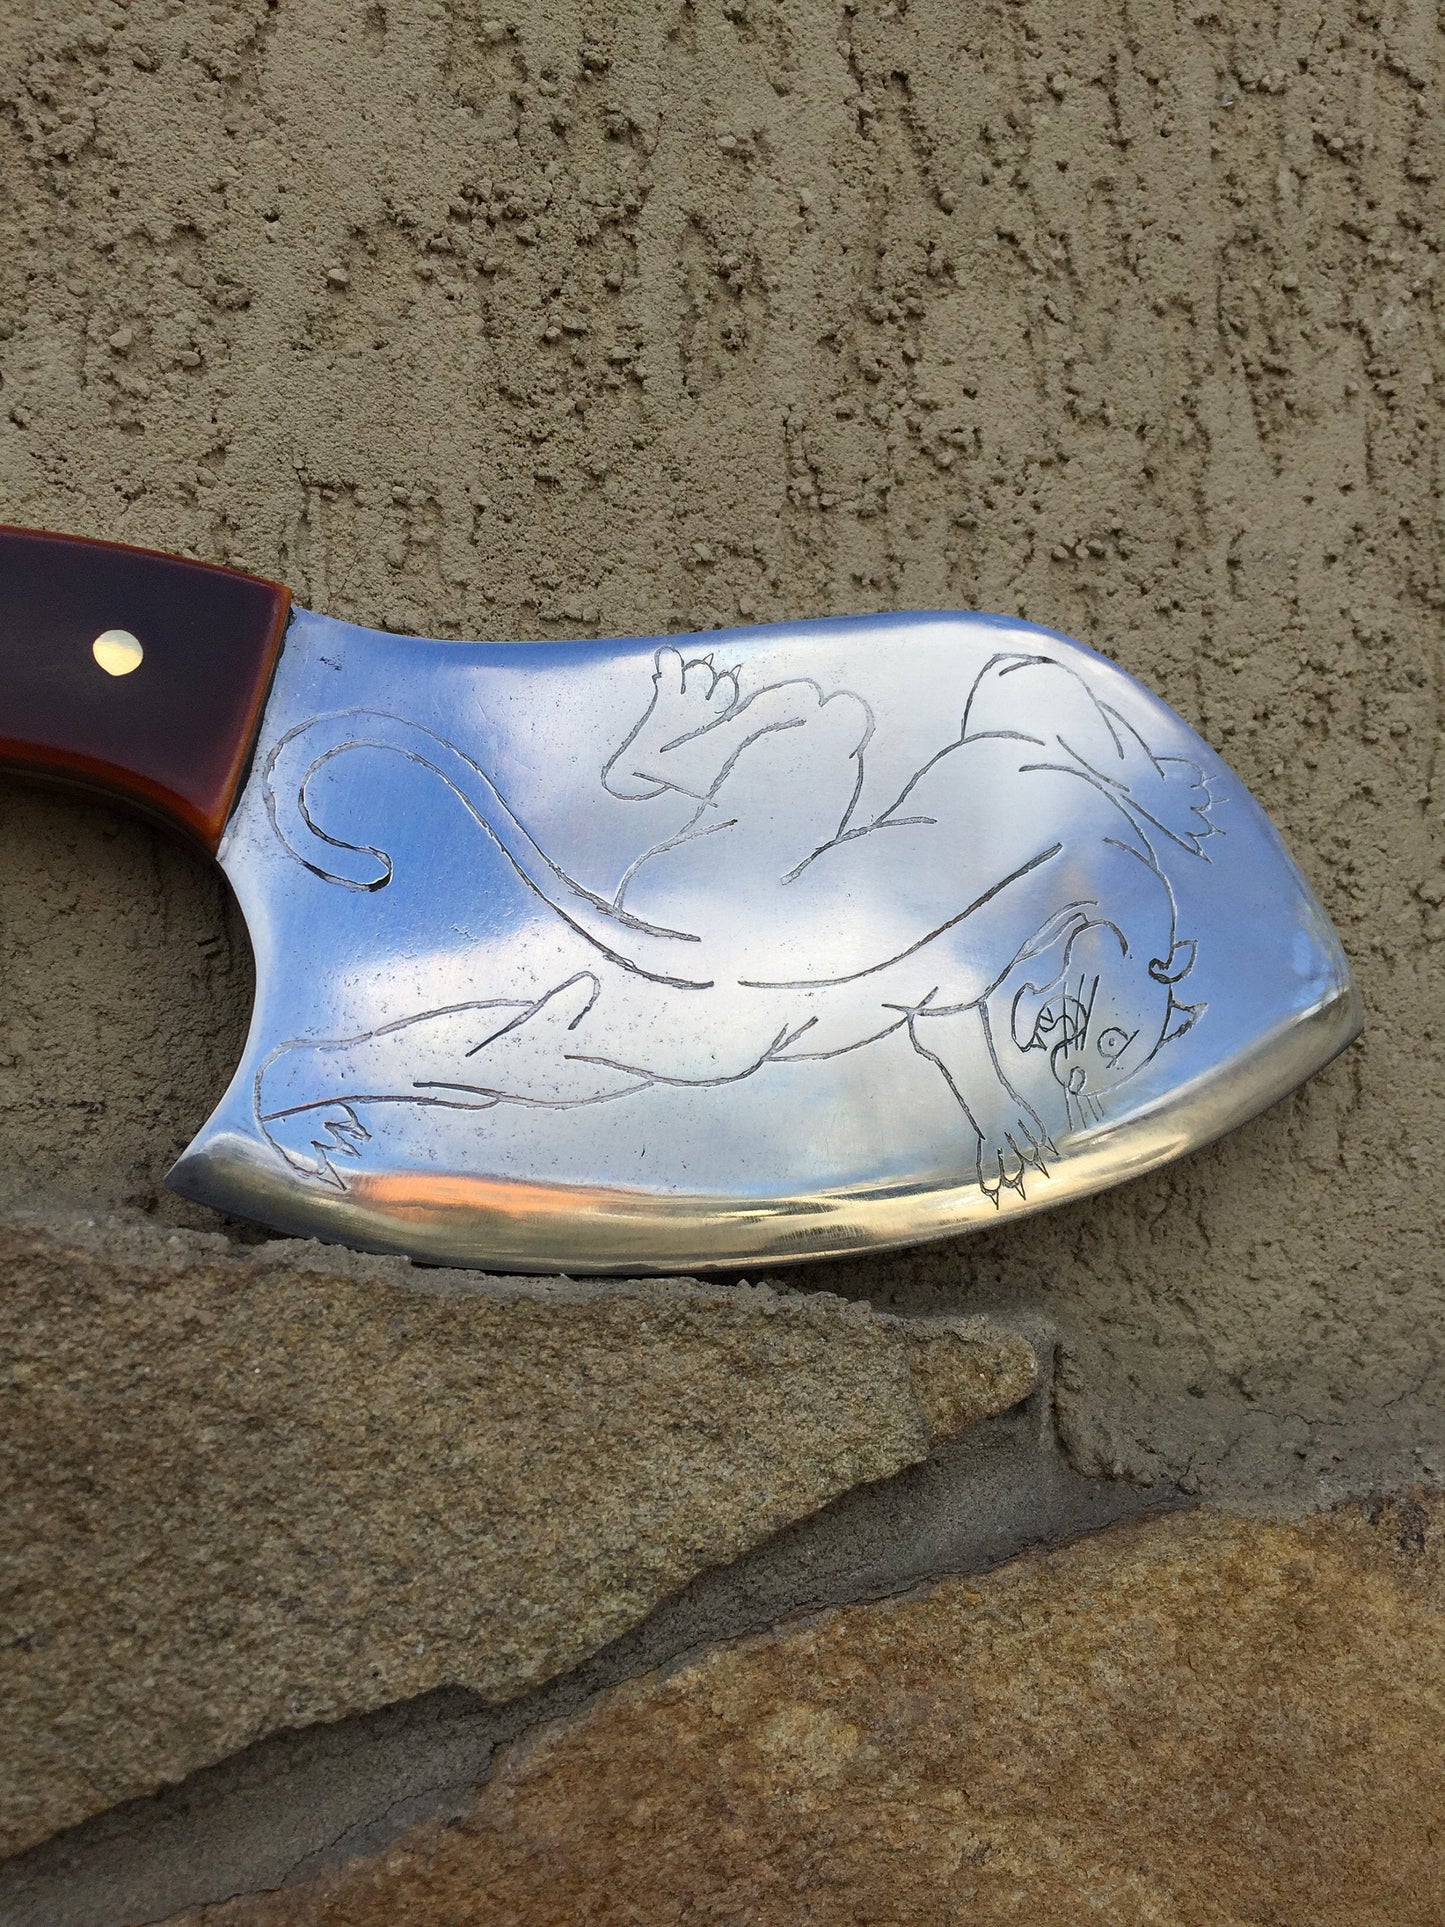 Professional knife, chef knife, hand made knife, kitchen gift, engraved chef knife, gift for chefs, acid etched, cooking,custom knife,knives